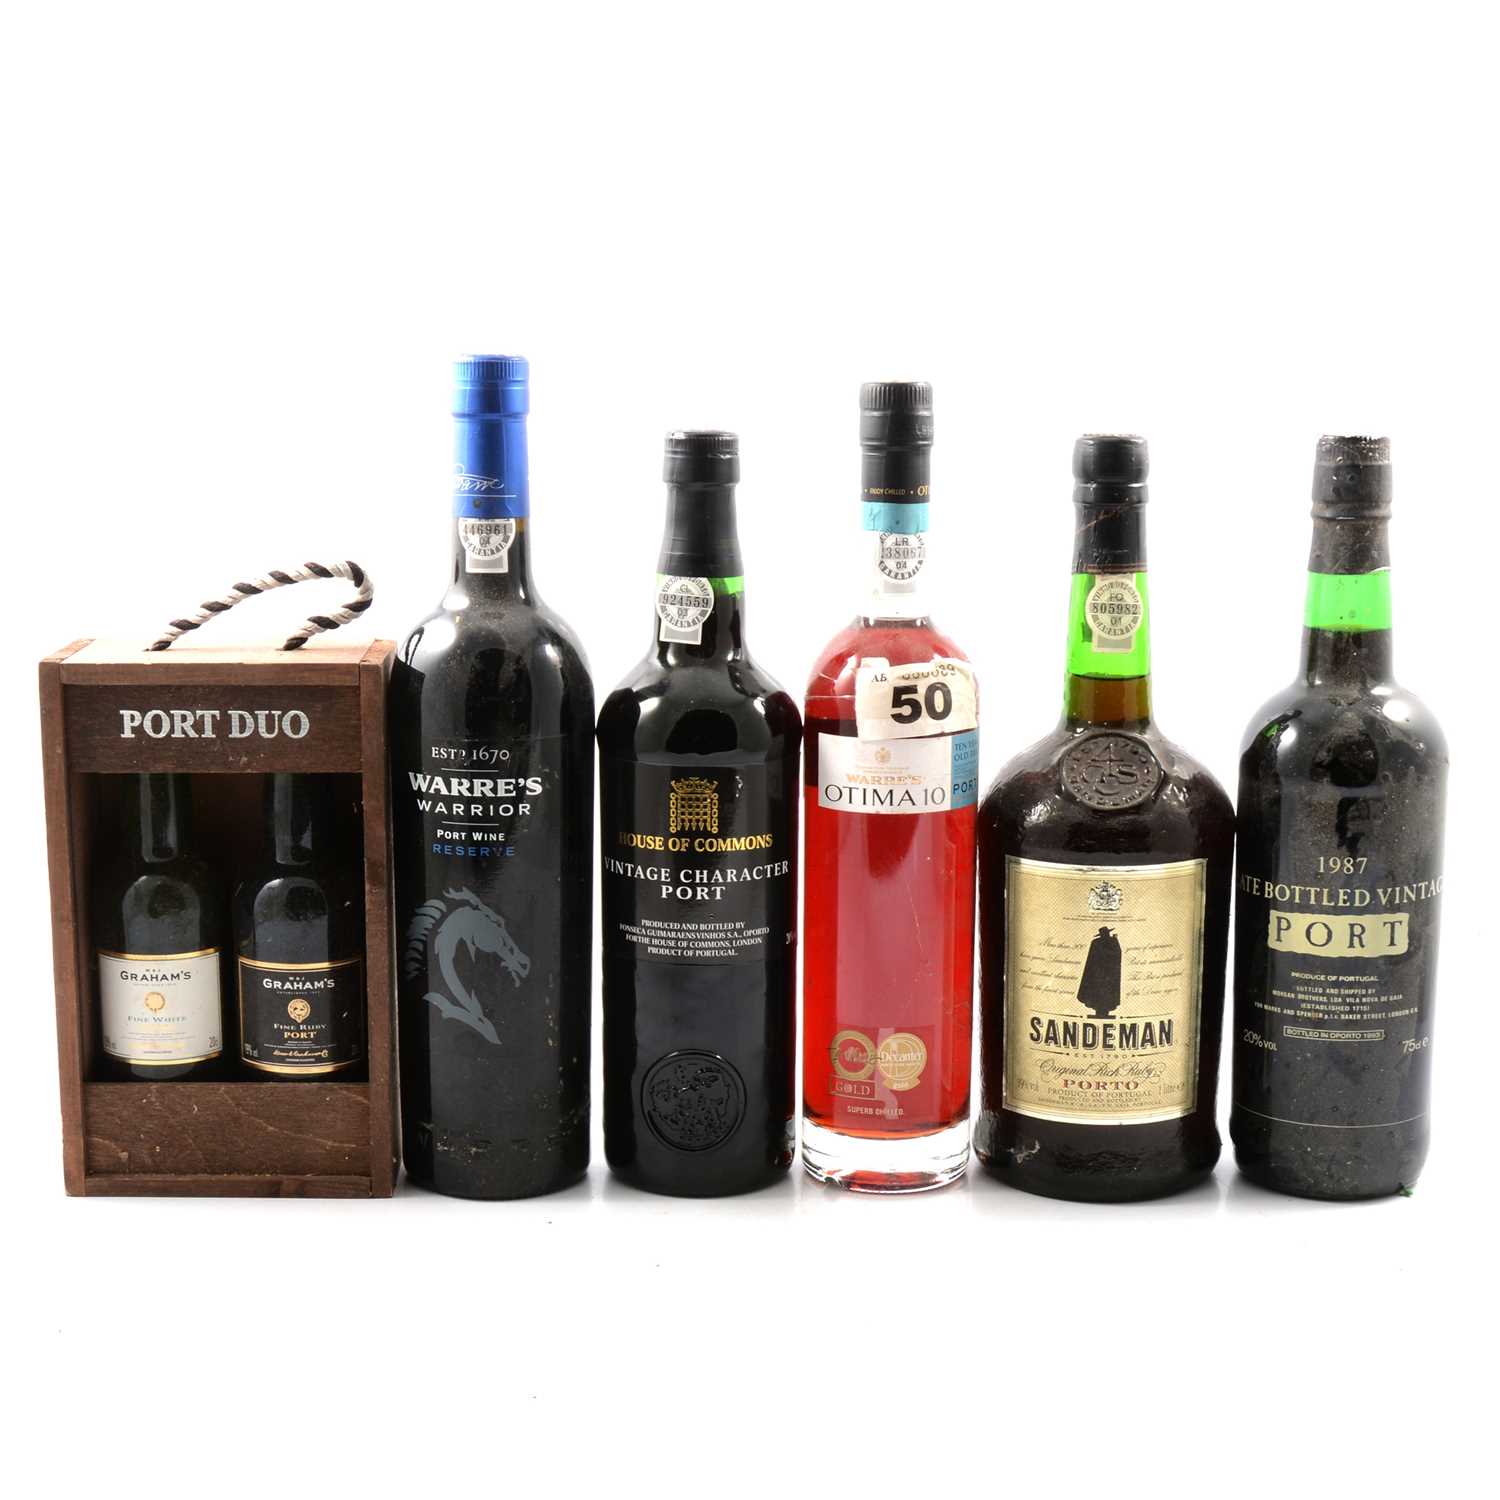 Lot 256 - Selection of Ports, Warre's, Graham's, Sandeman and others